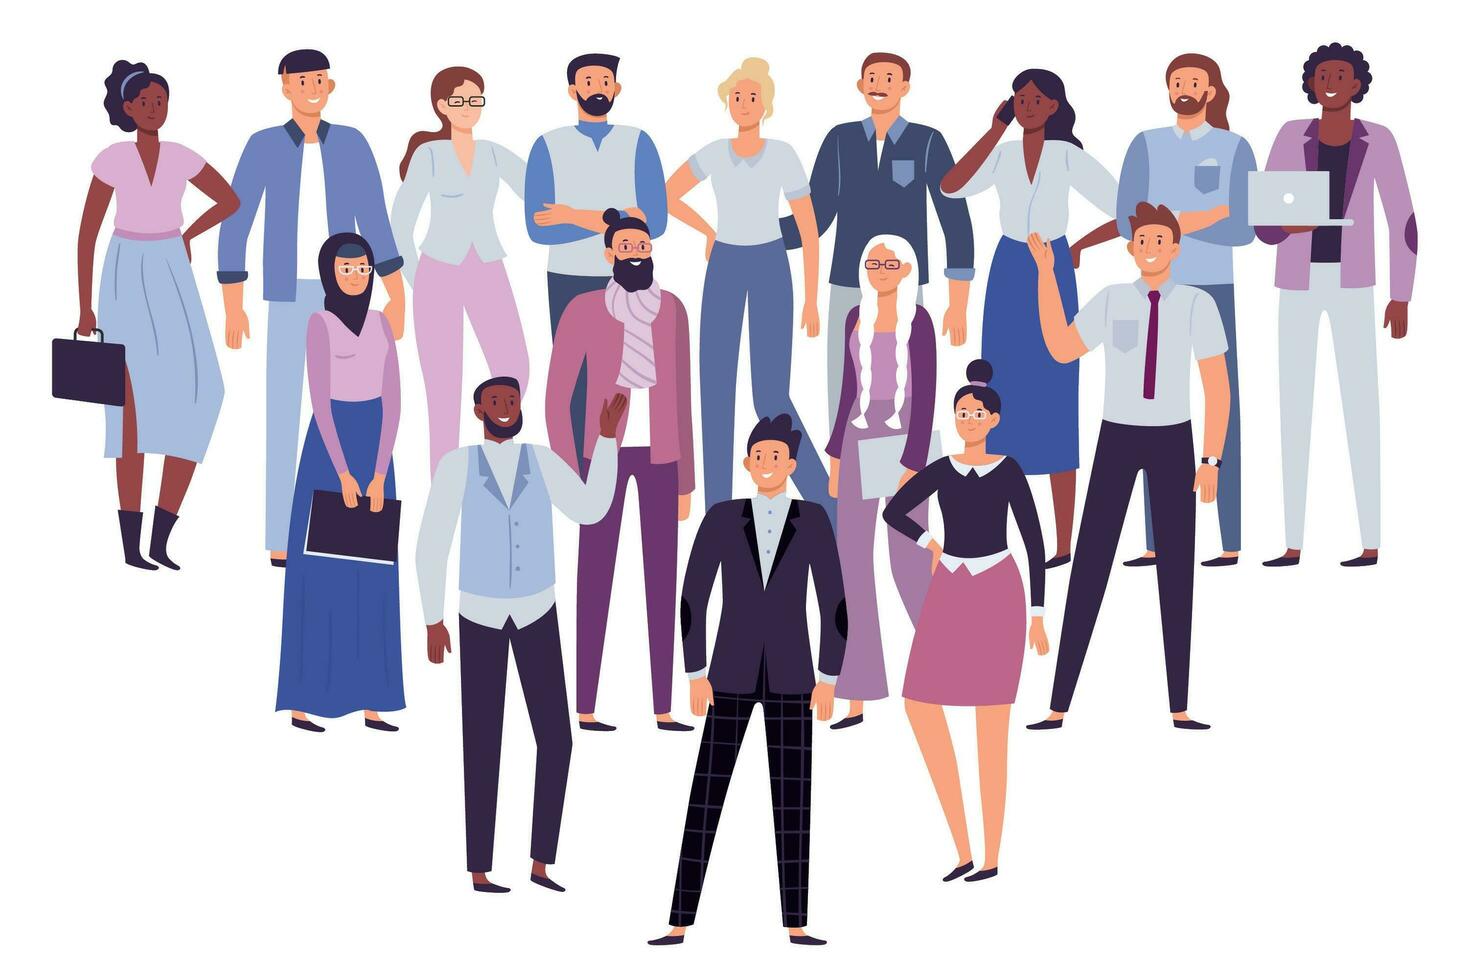 Professional people team. Business persons group, society leadership and office workers crowd vector illustration